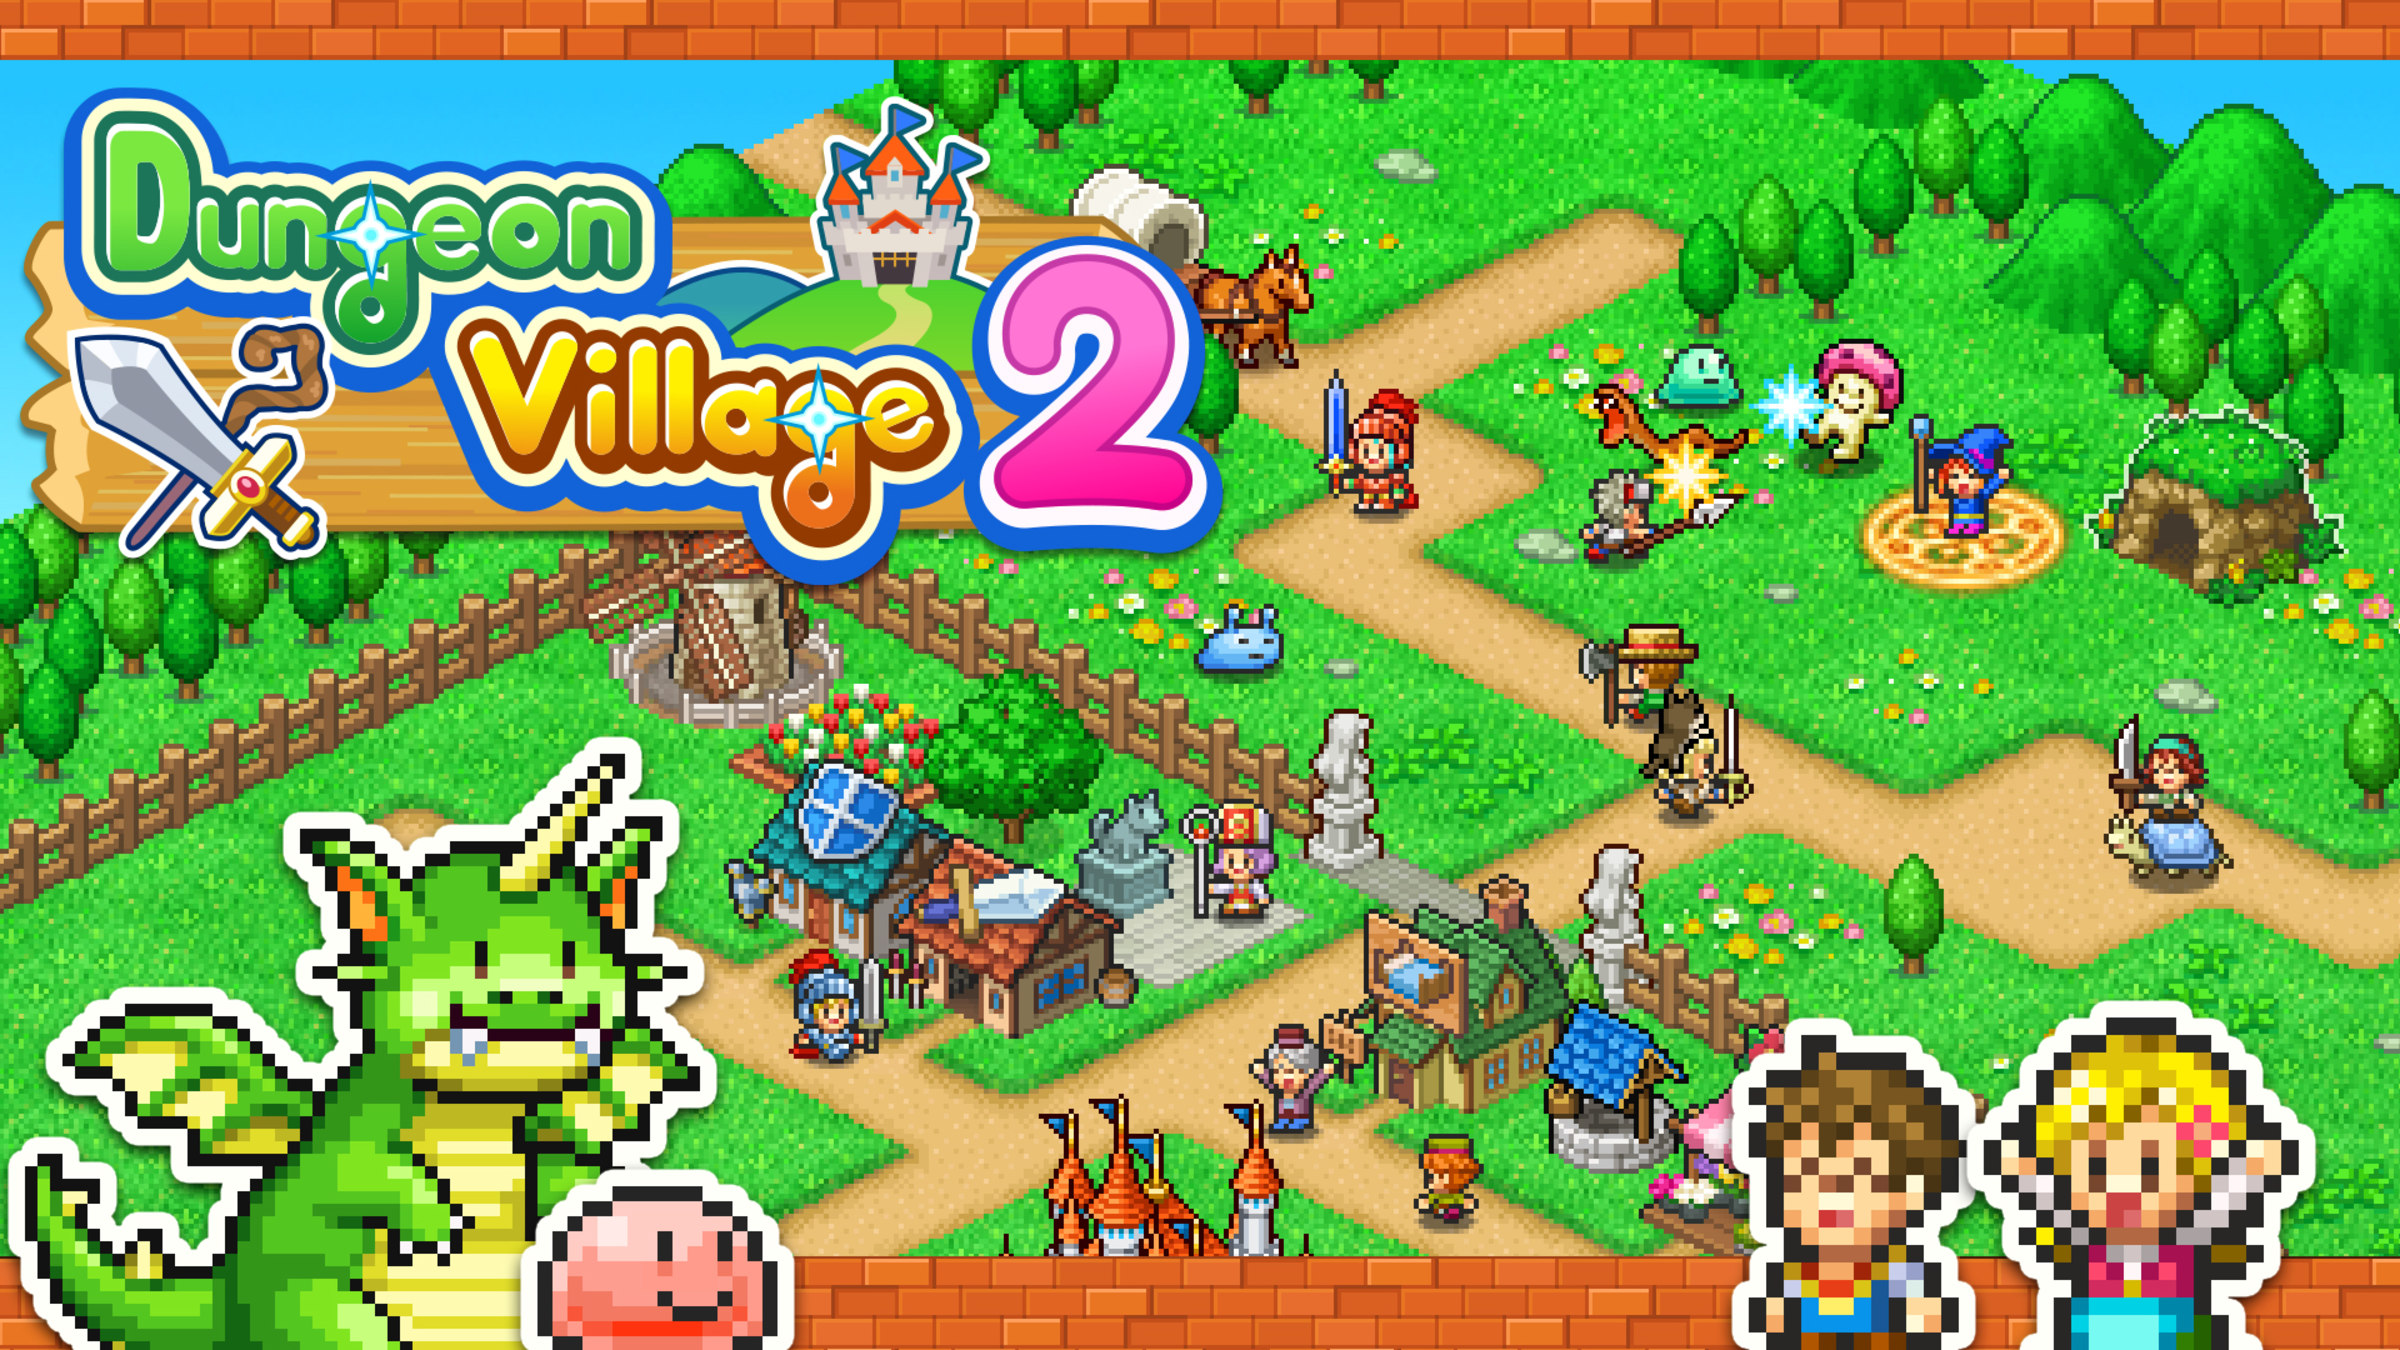 Dungeon Village 2 For Nintendo Switch - Nintendo Official Site